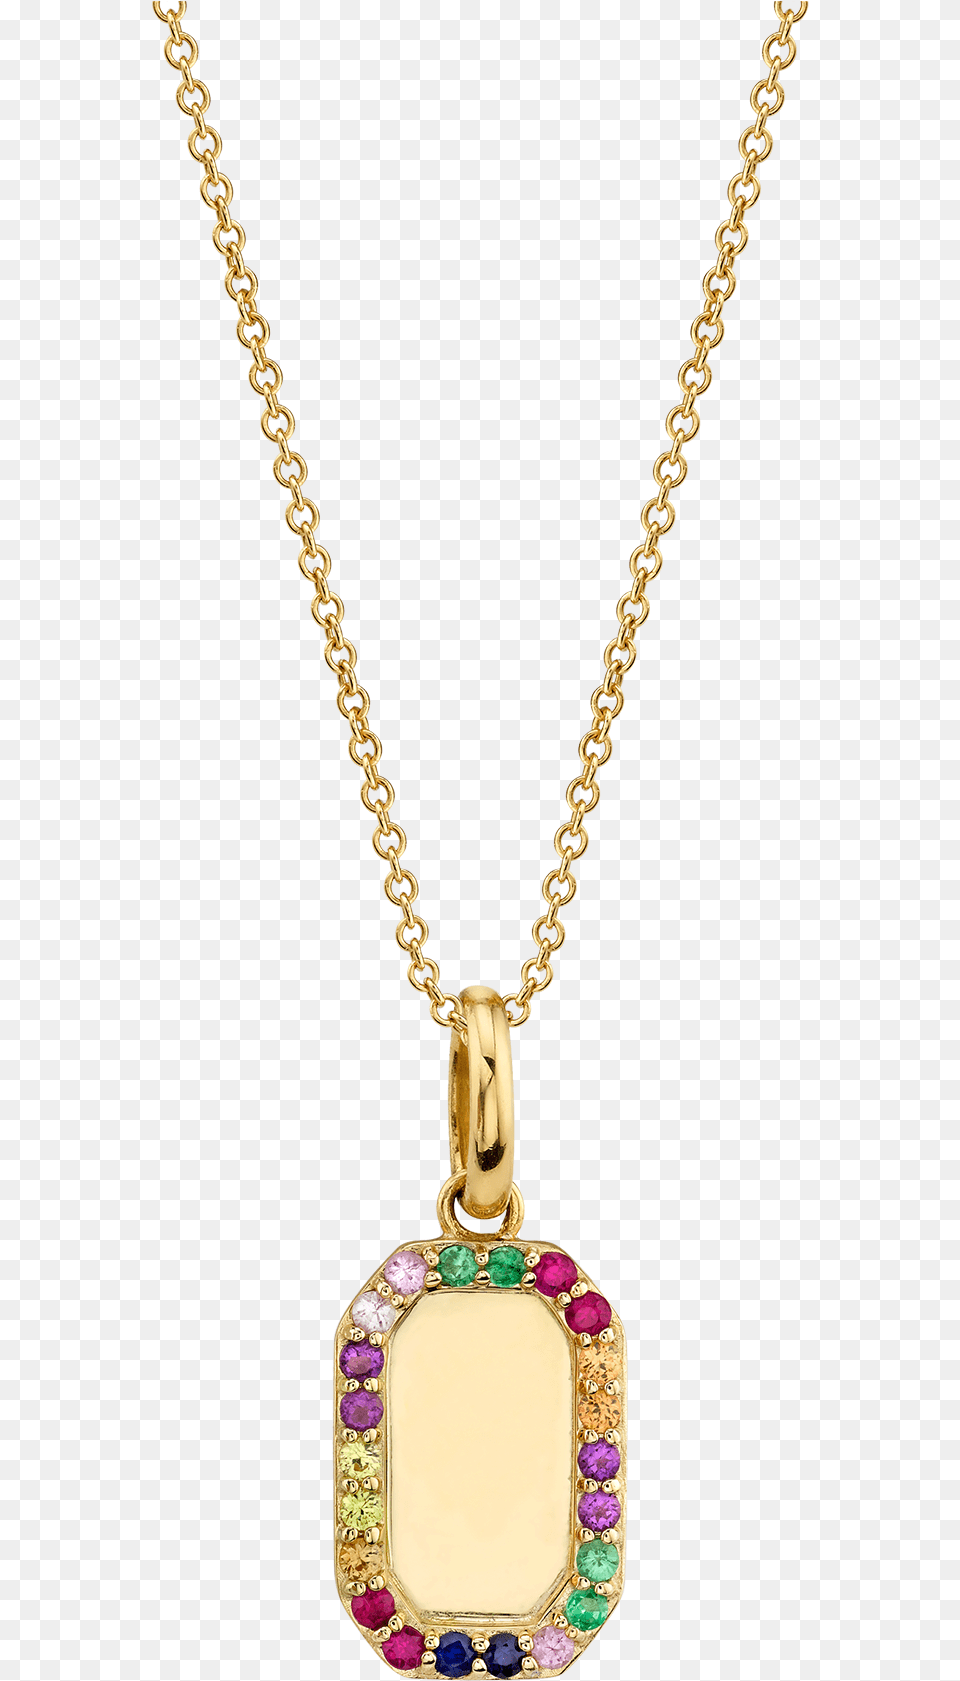 Rainbow Rectangle Gold Pendant, Accessories, Jewelry, Necklace Png Image